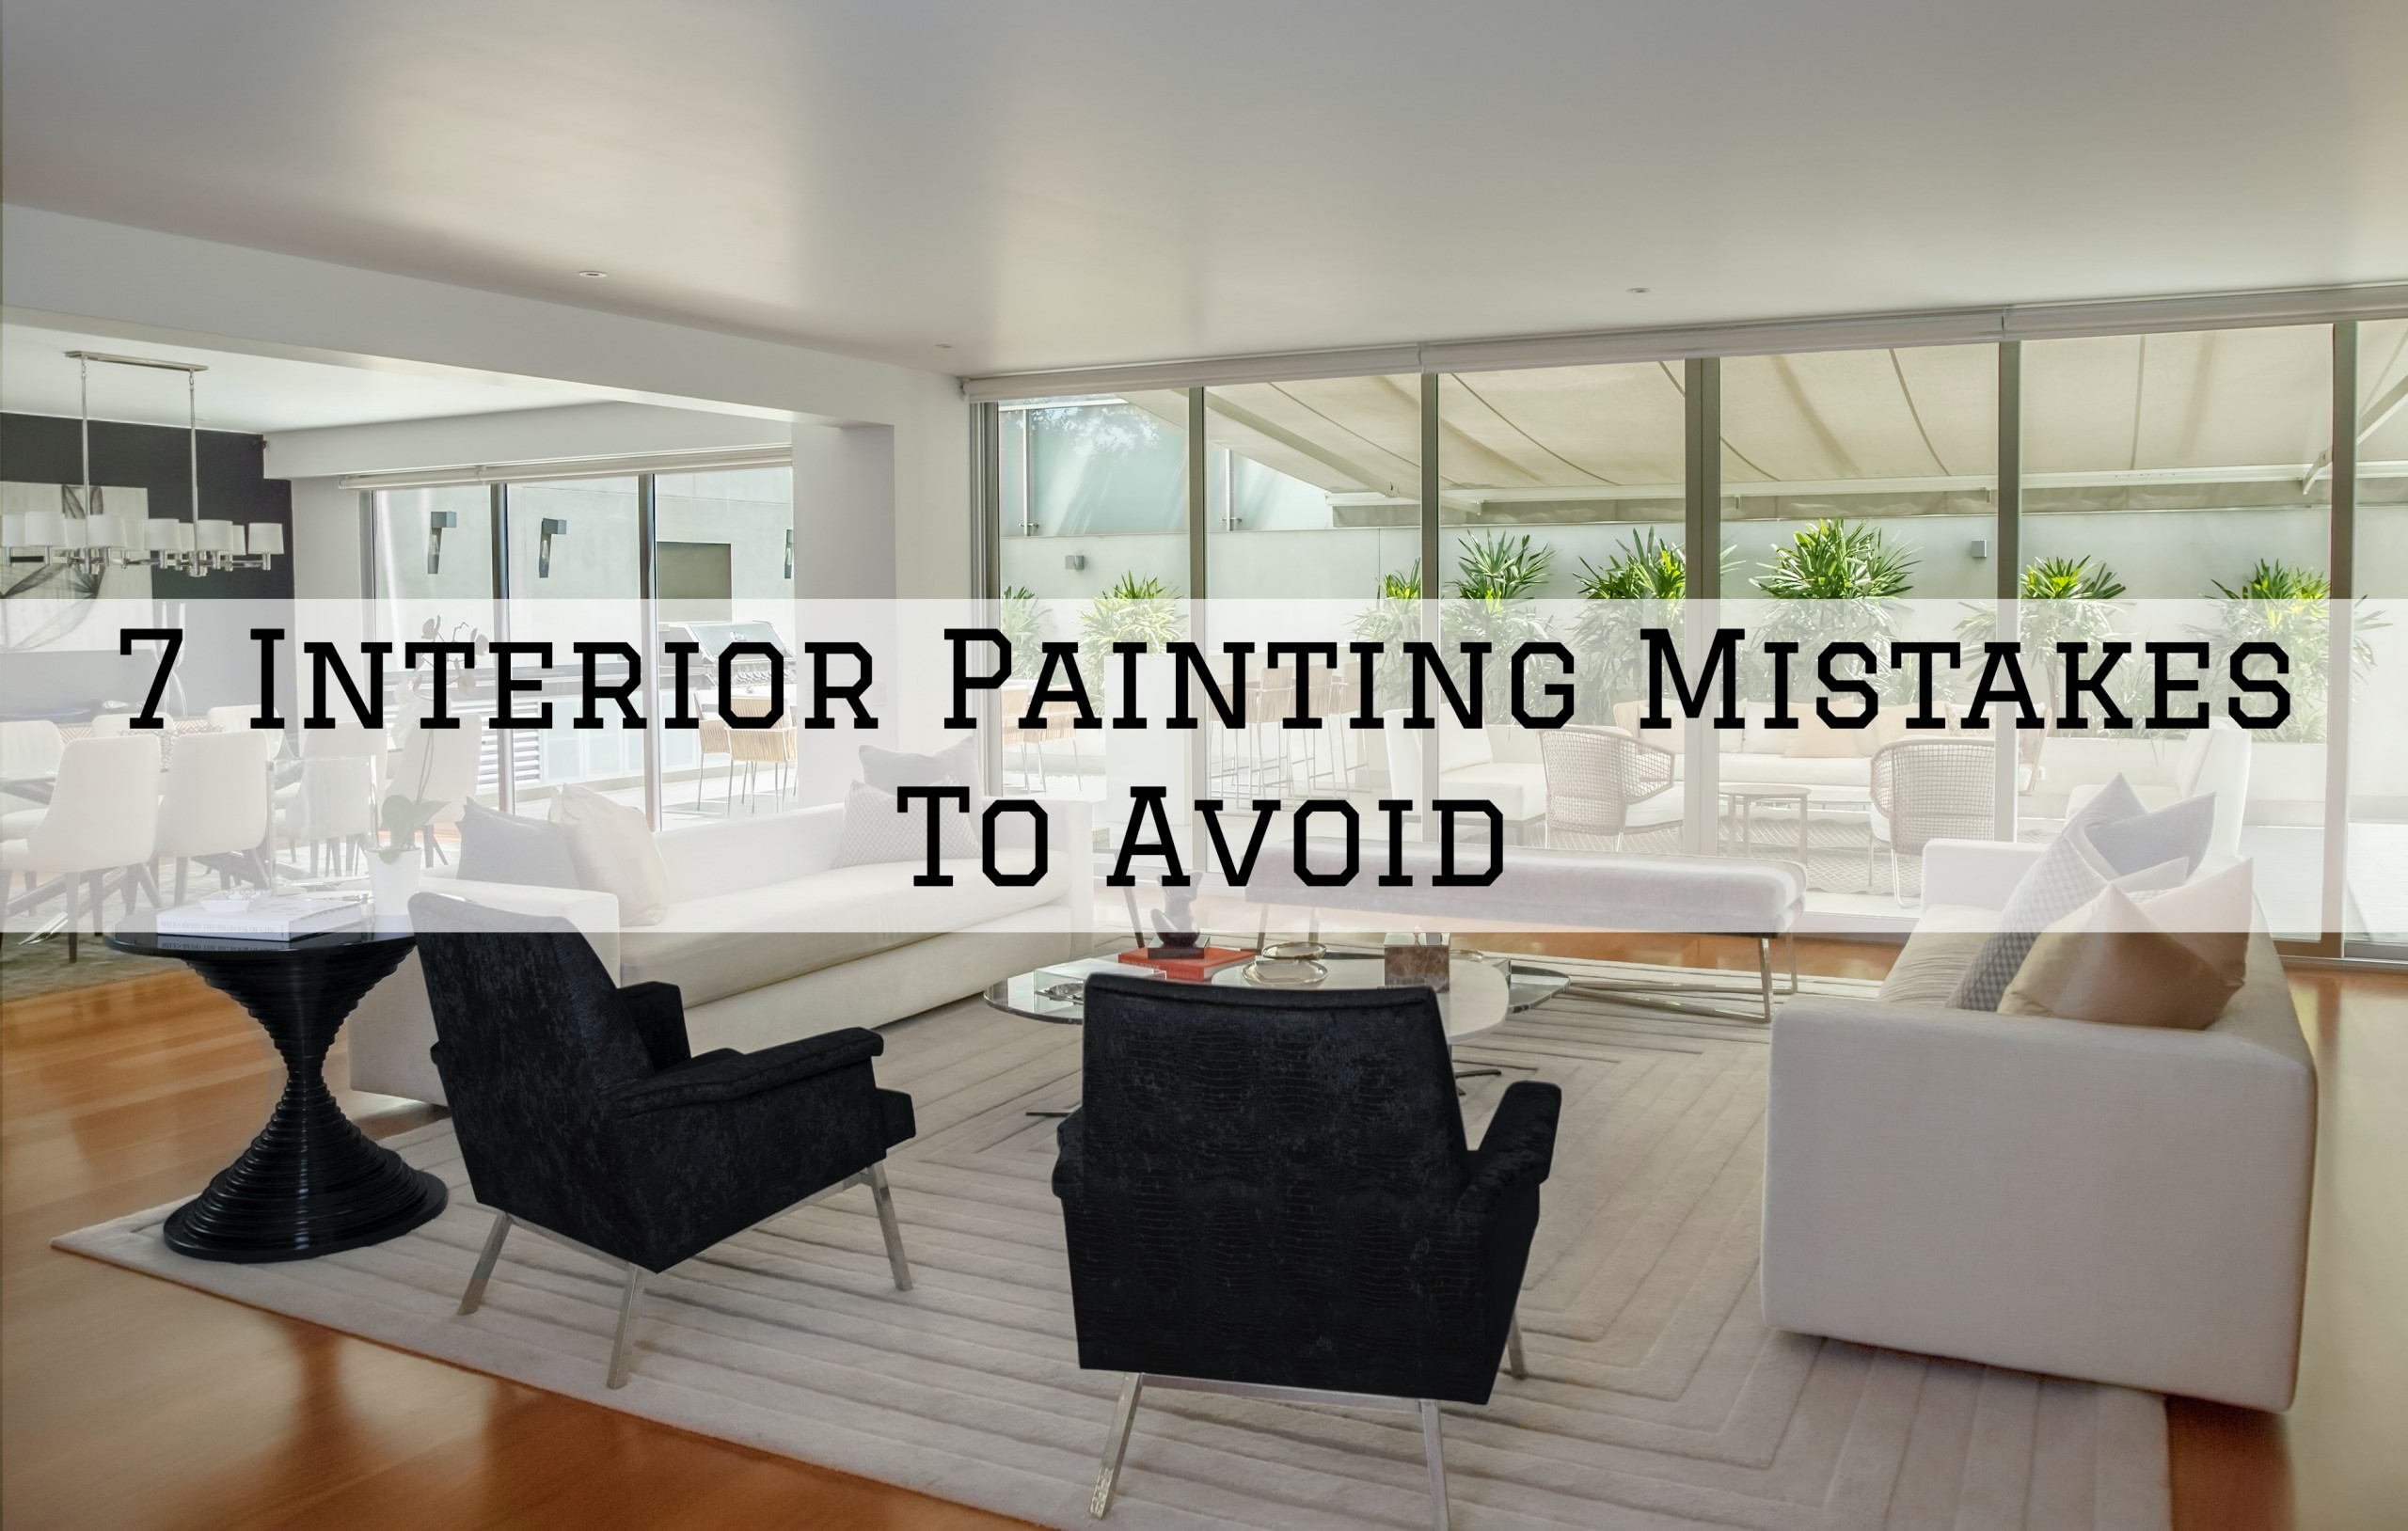 14-05-2021 Steves Quality Painting And Washing Princeton WI Interior Painting Mistakes To Avoid